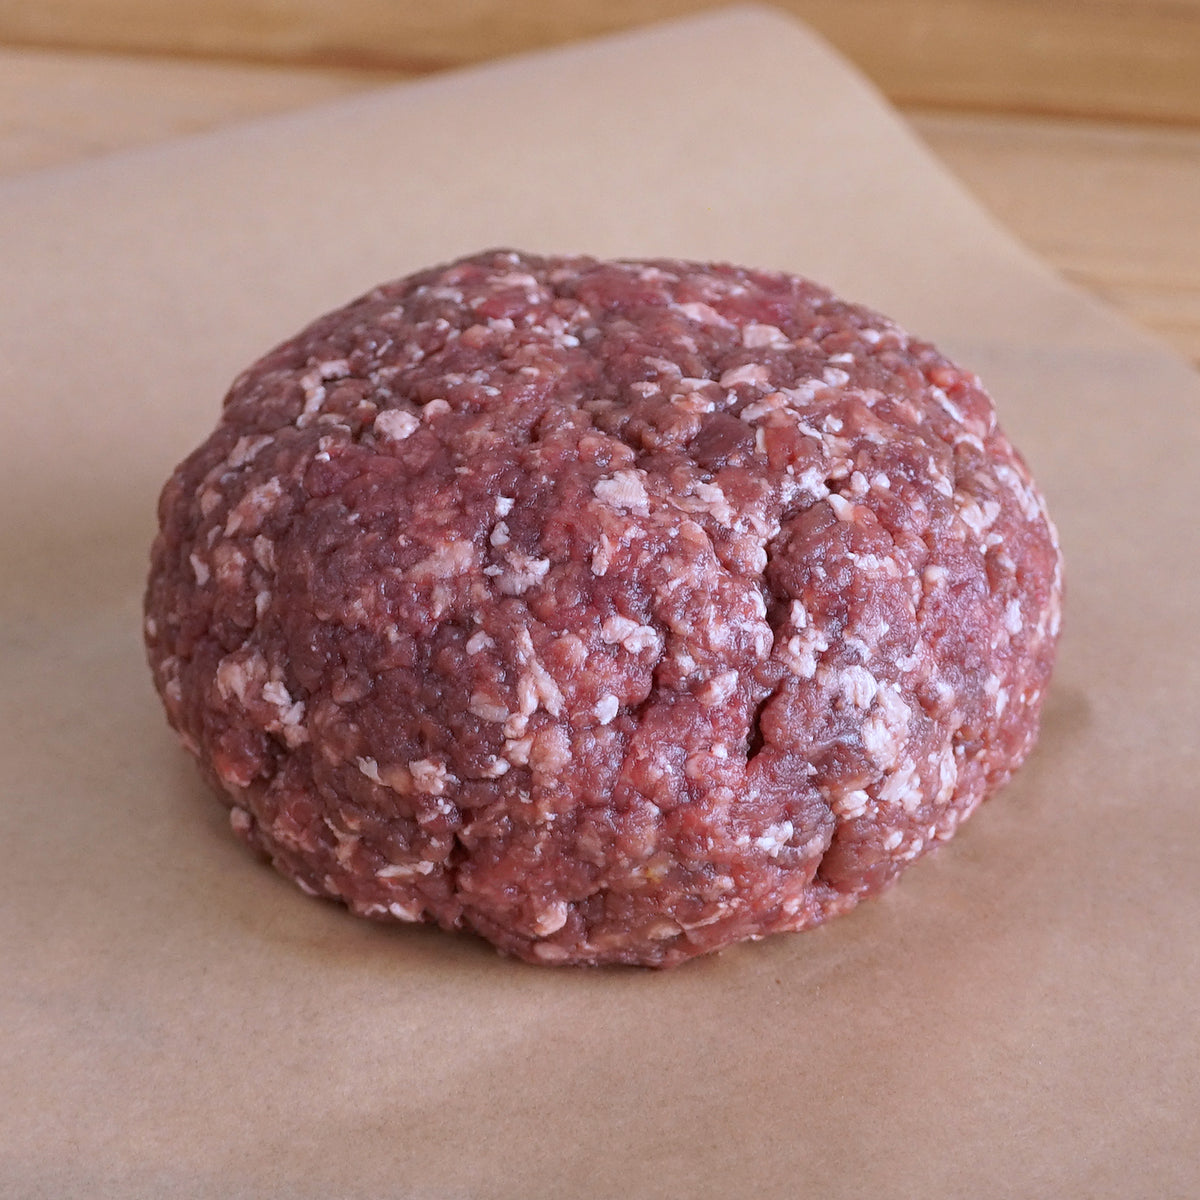 Grass-Fed Thick Skirt Ground Beef Mince from Australia (300g) - Horizon Farms